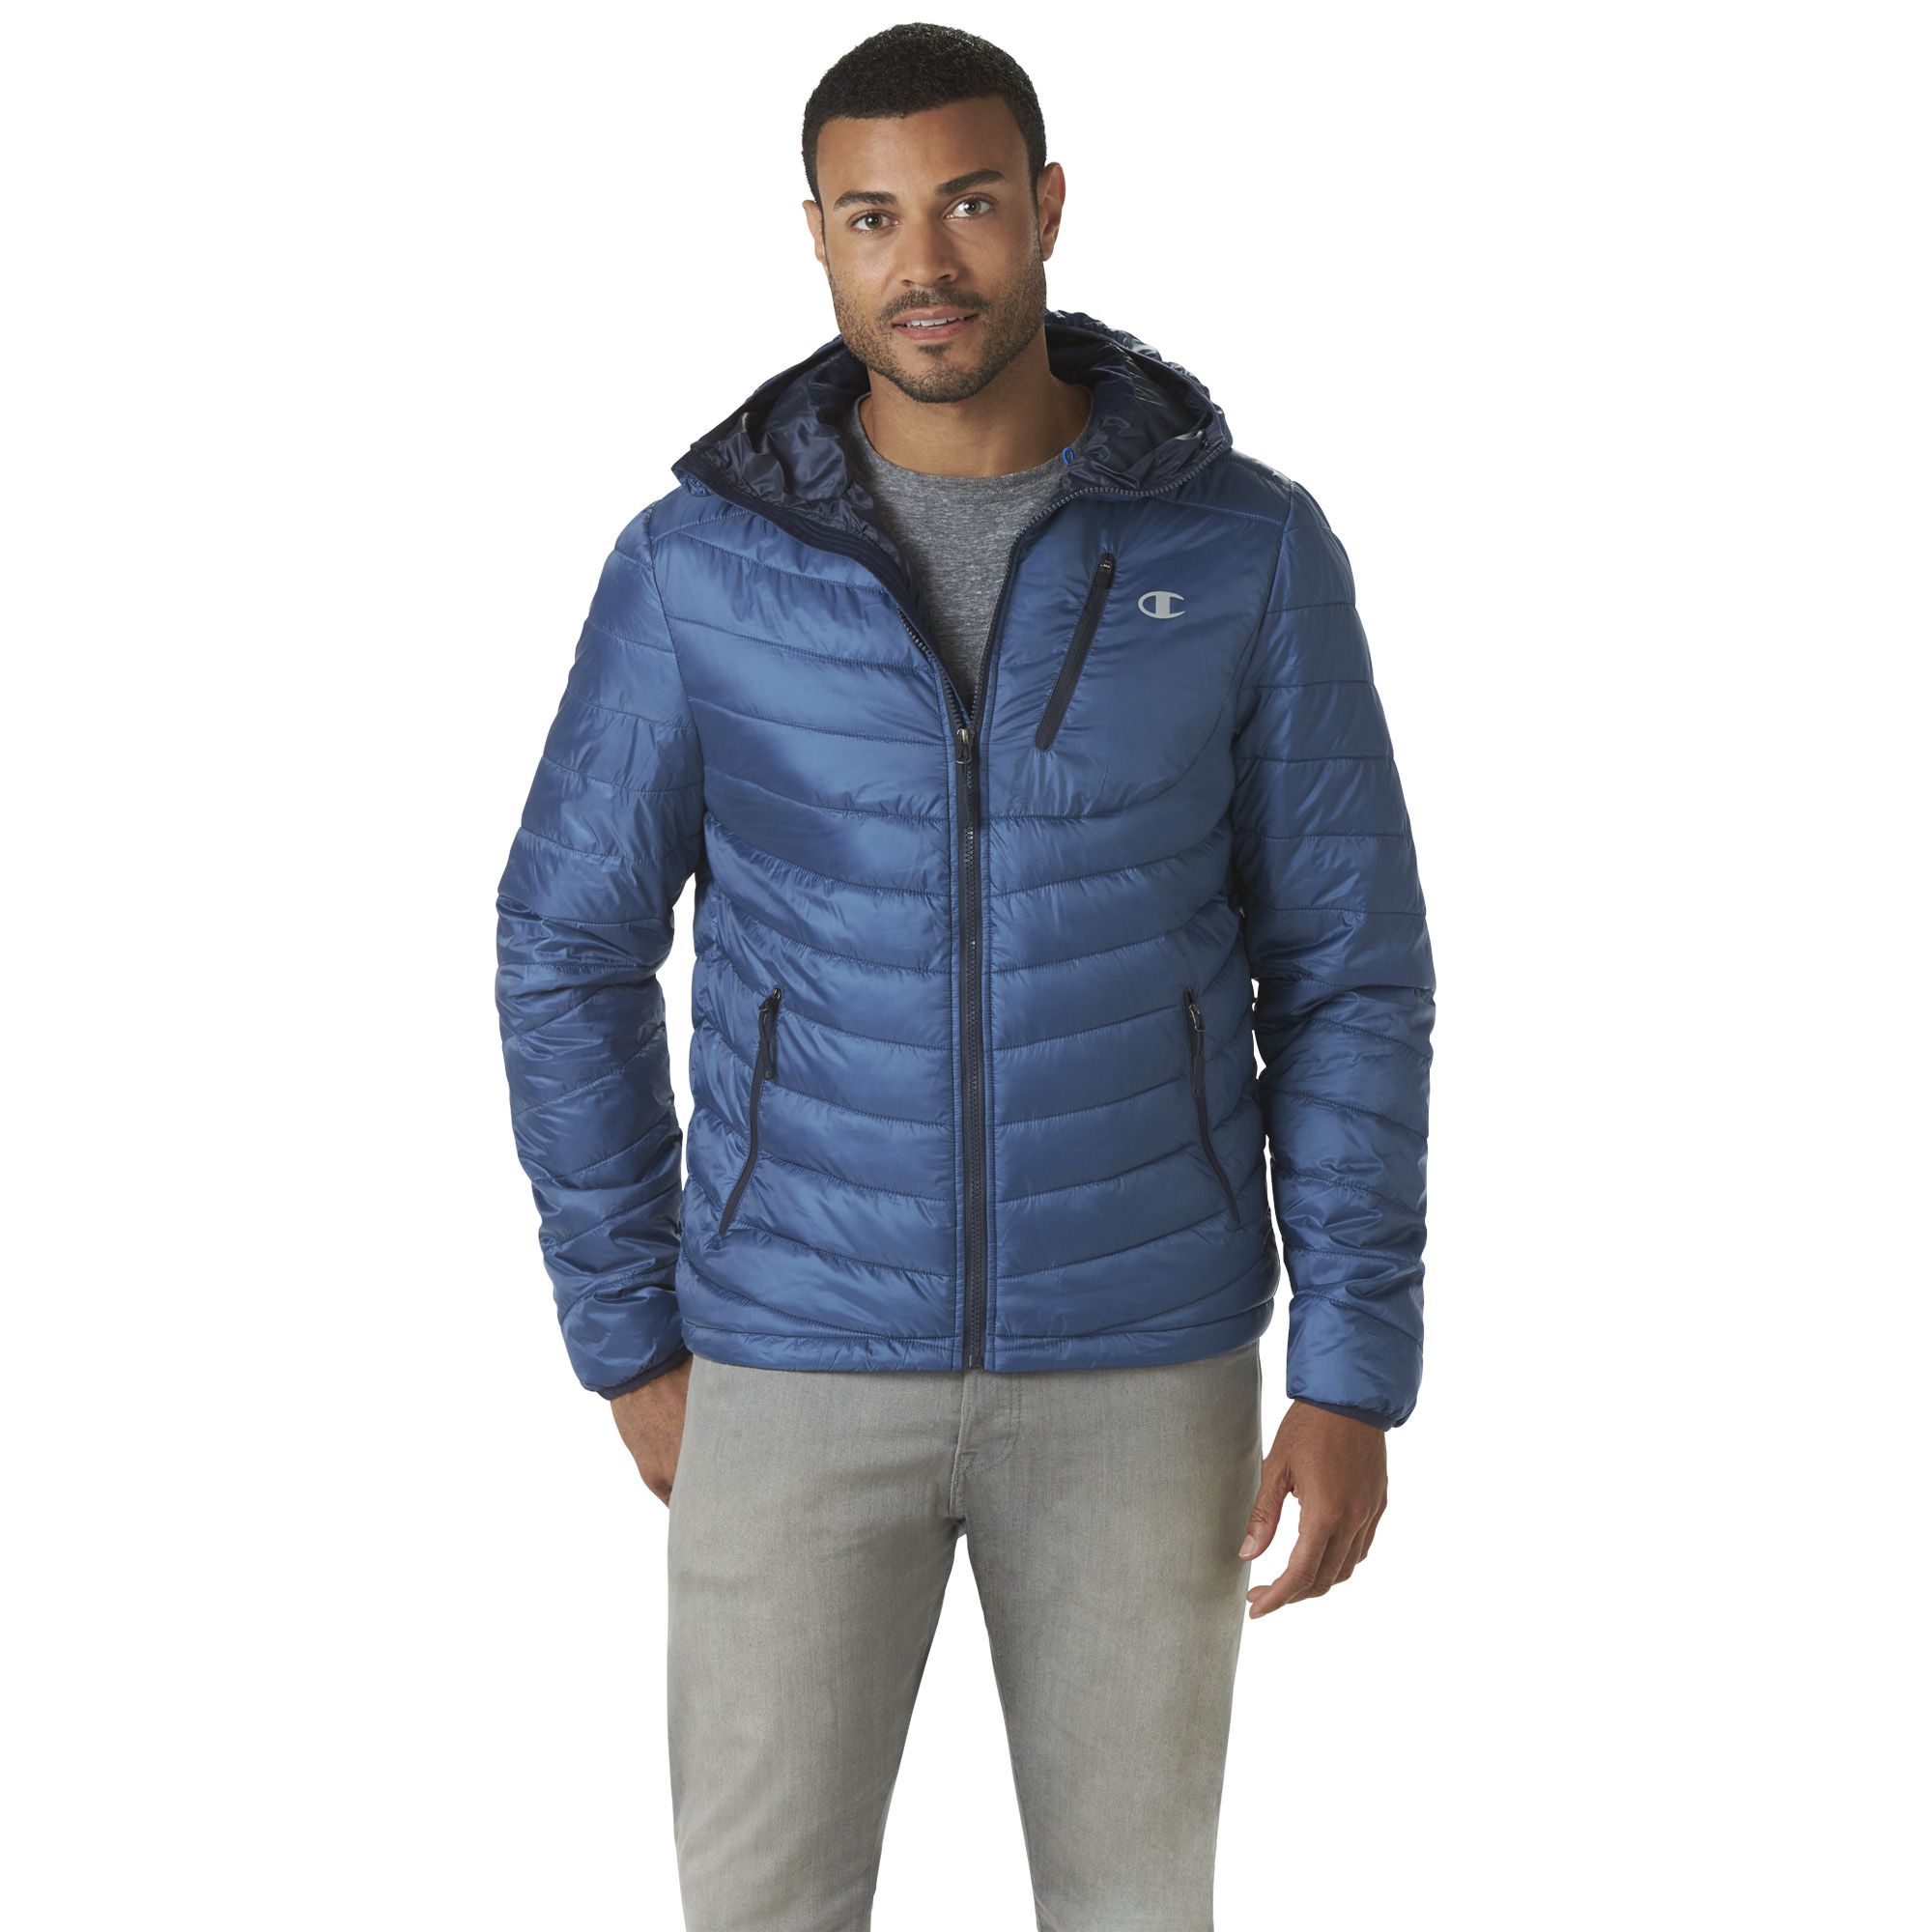 Tall Sizes Champion Mens Technical Synthetic Down Jacket